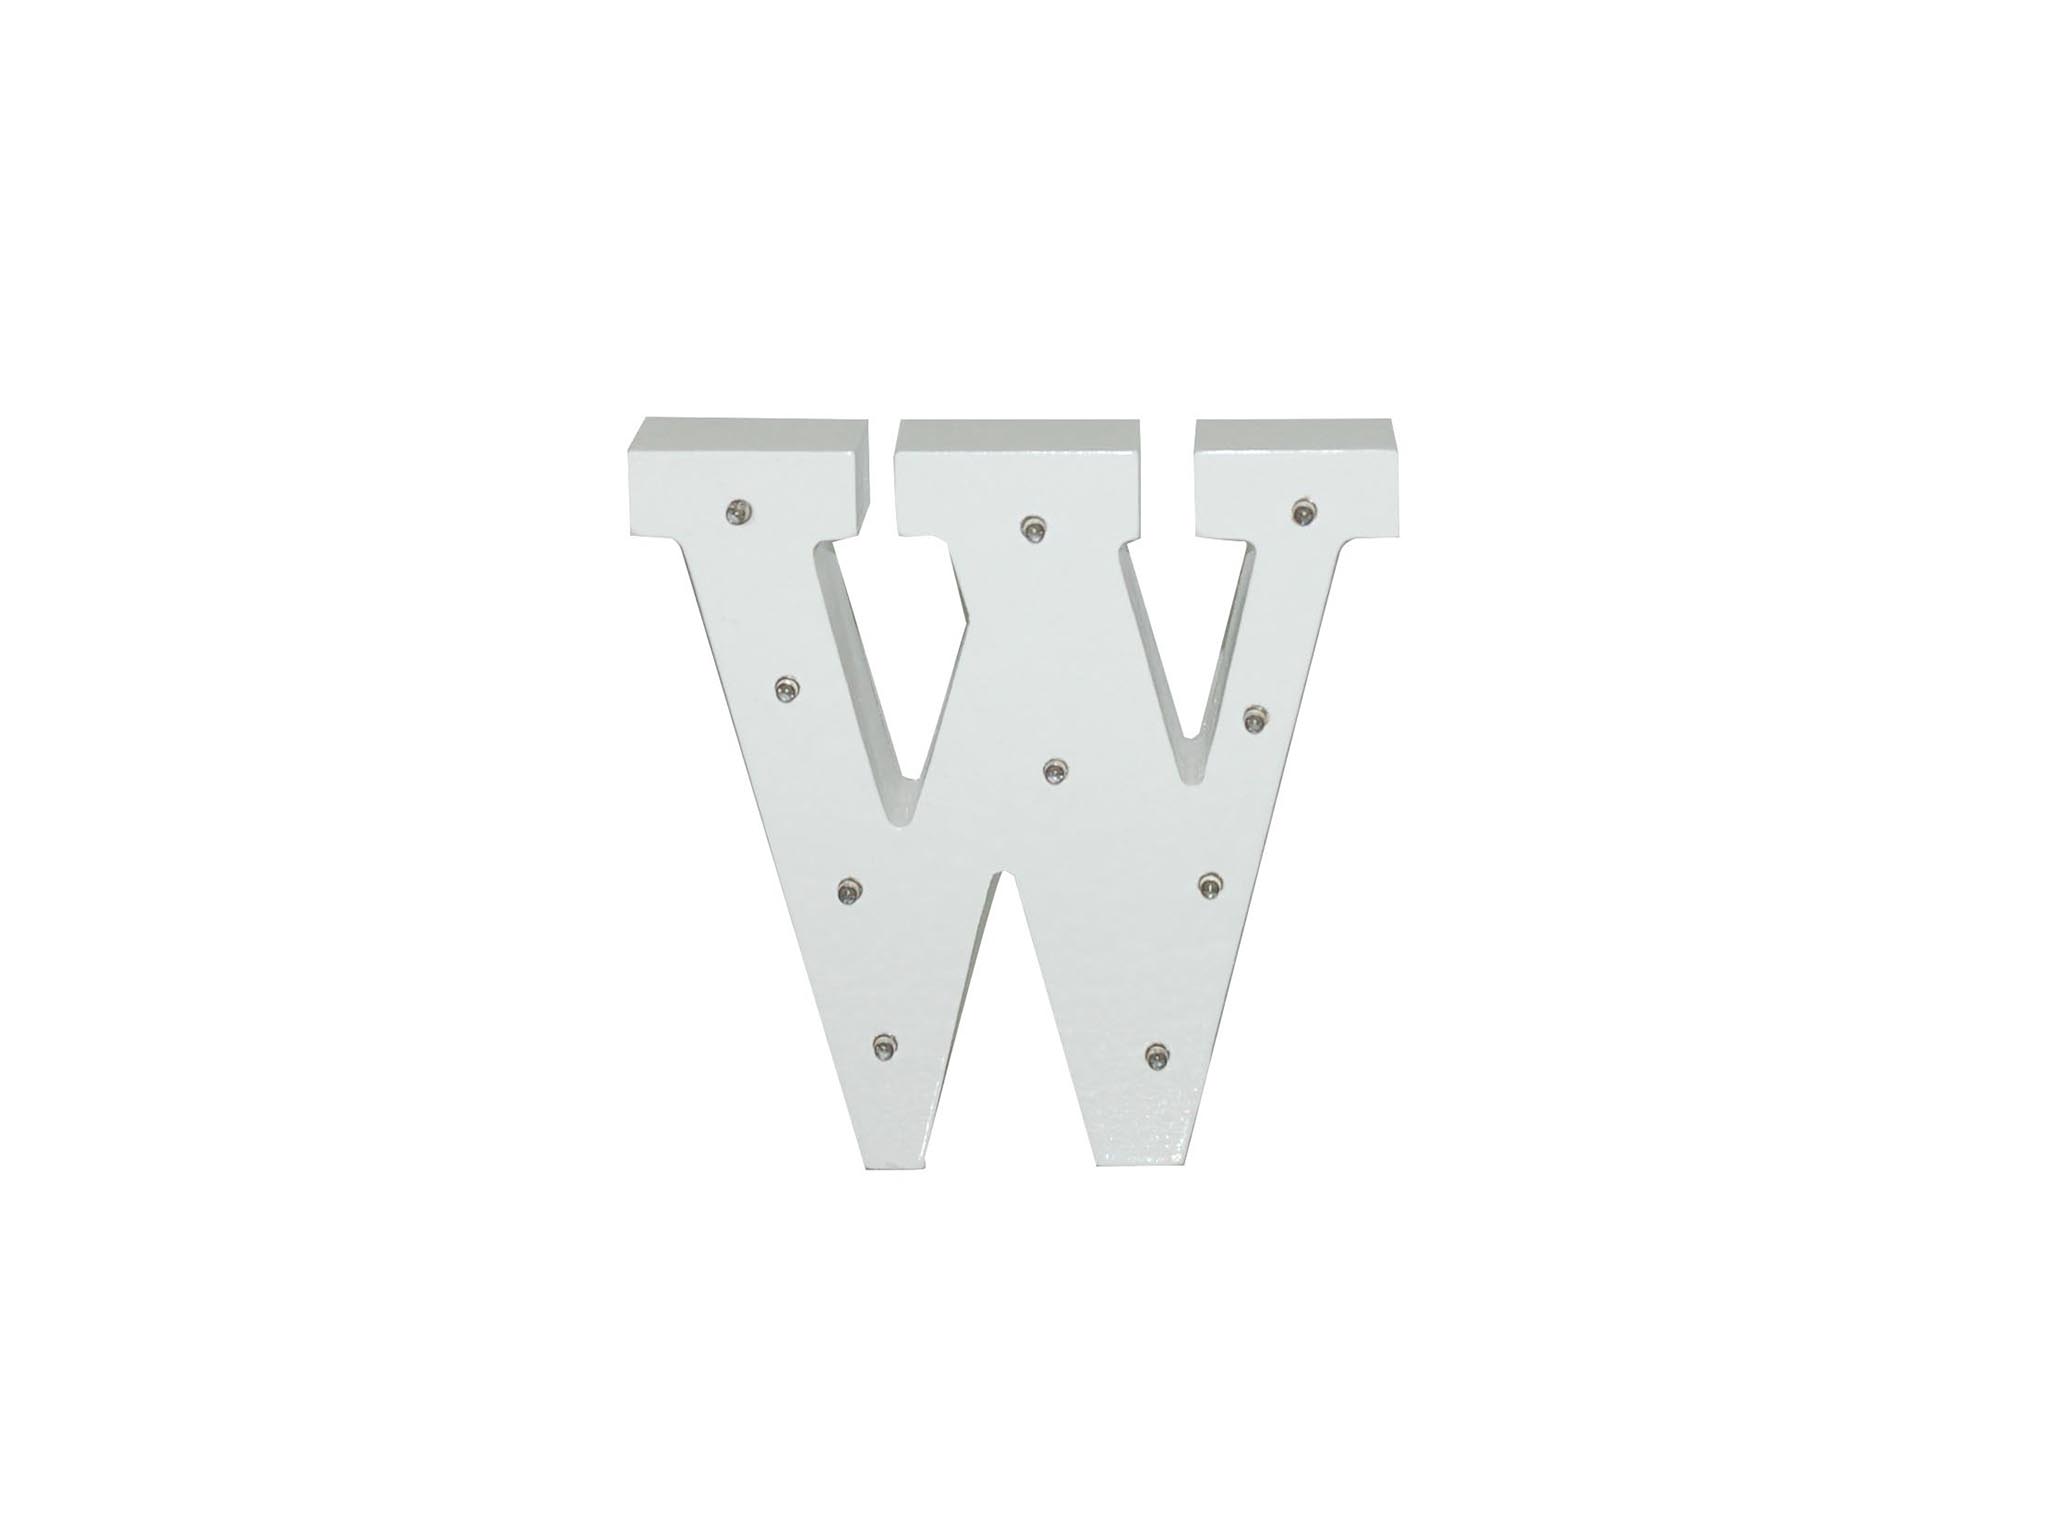 WHITE WOODEN LETTER W/LEDS - W cod. 2501939